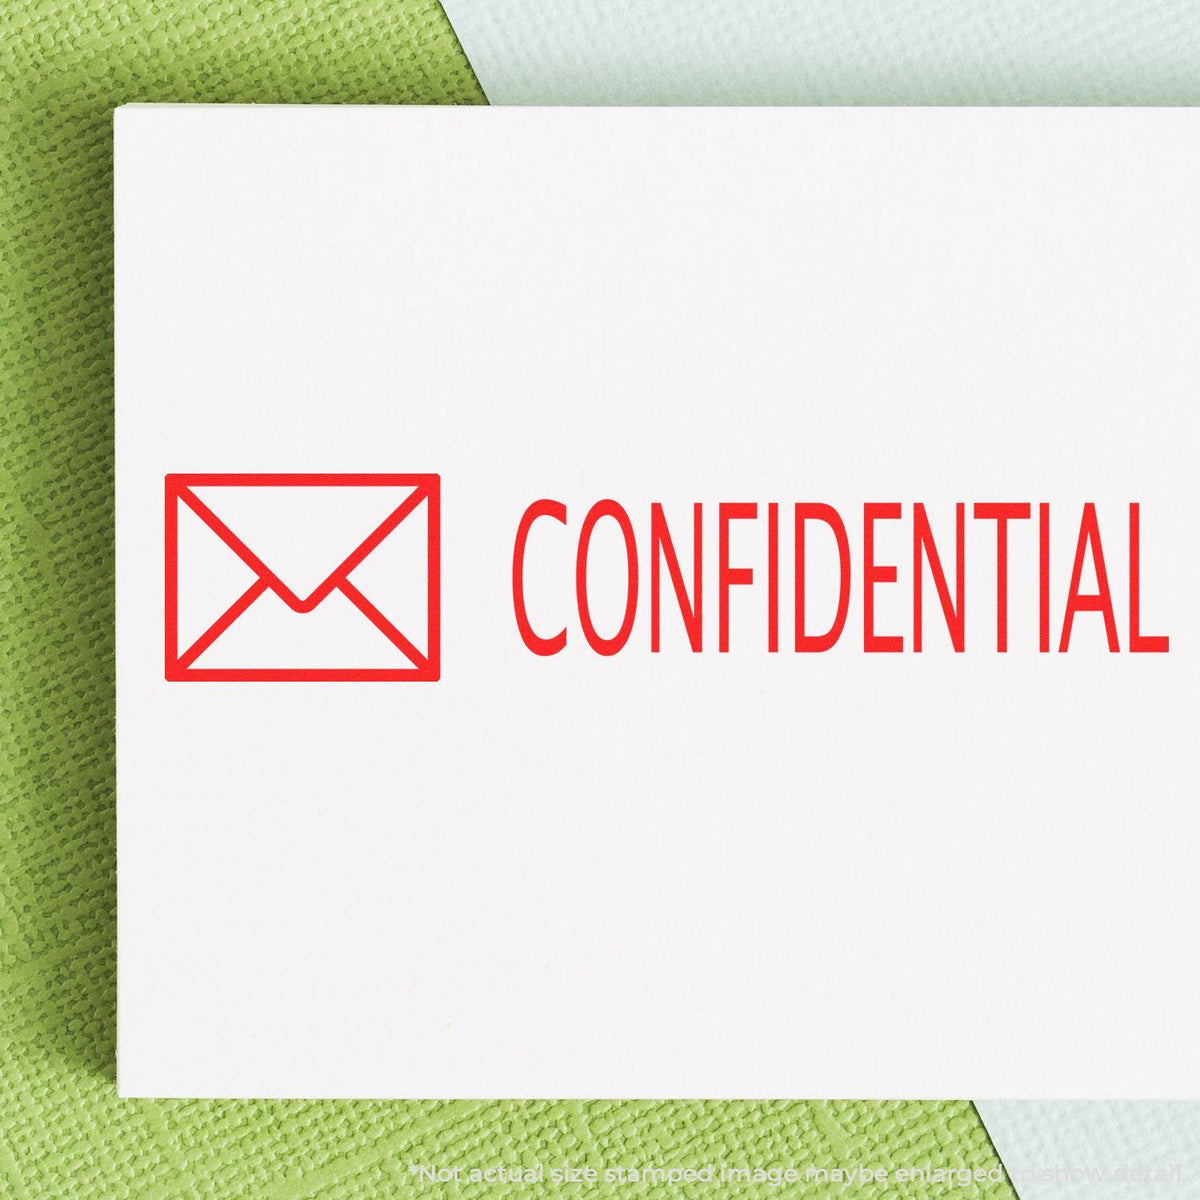 In Use Confidential with Envelope Rubber Stamp Image